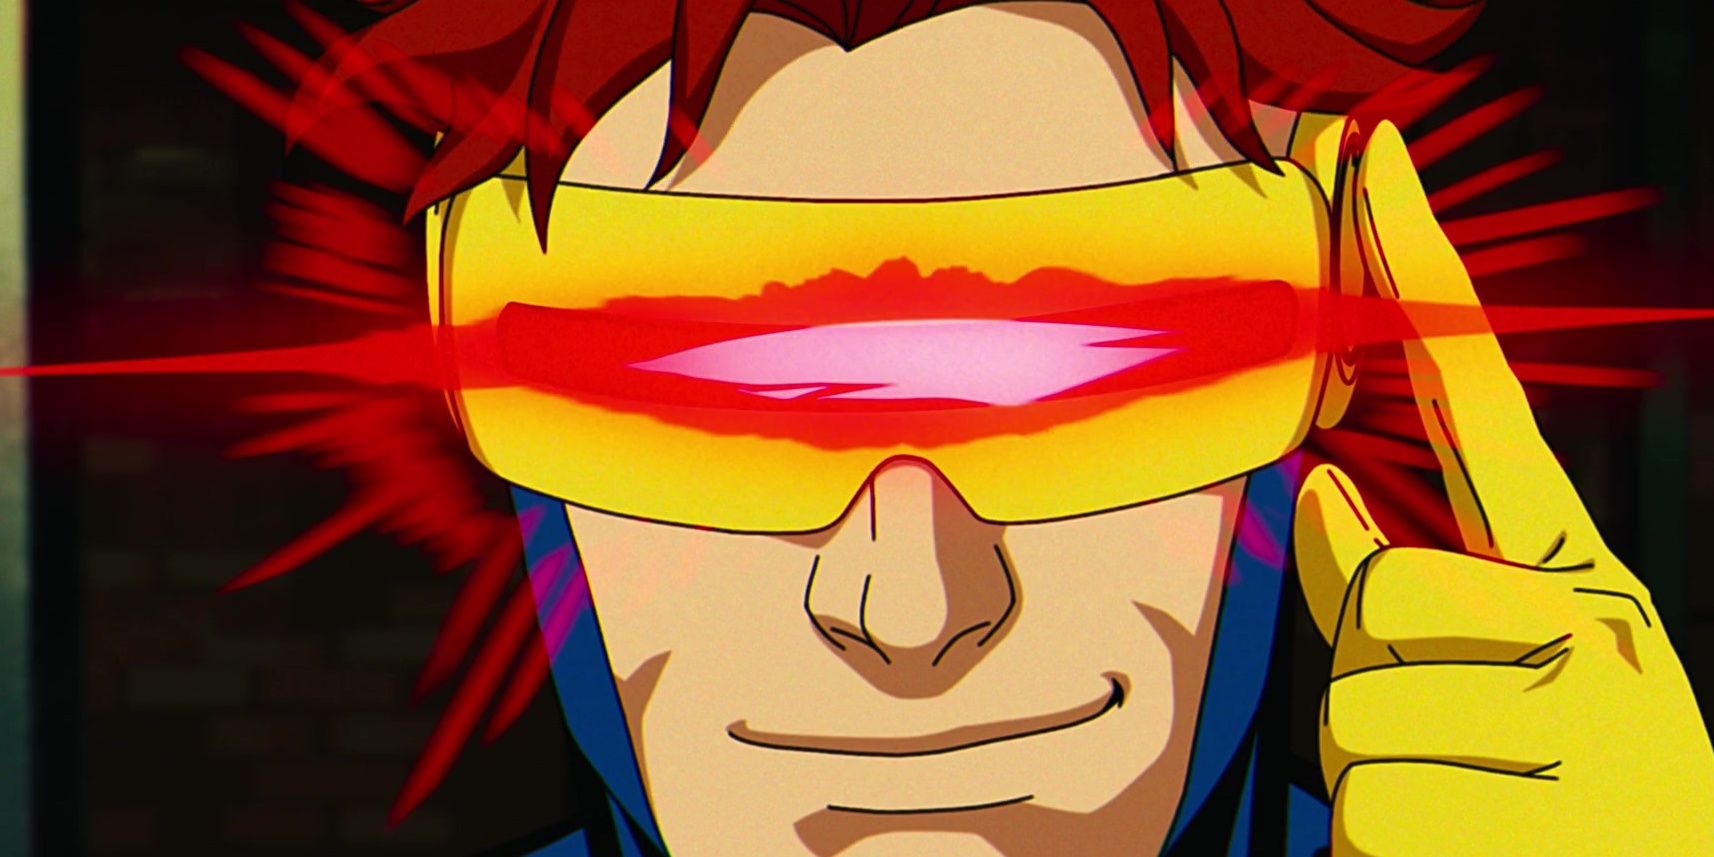 Cyclops smirks while firing his beam directly at the camera in X-Men '97